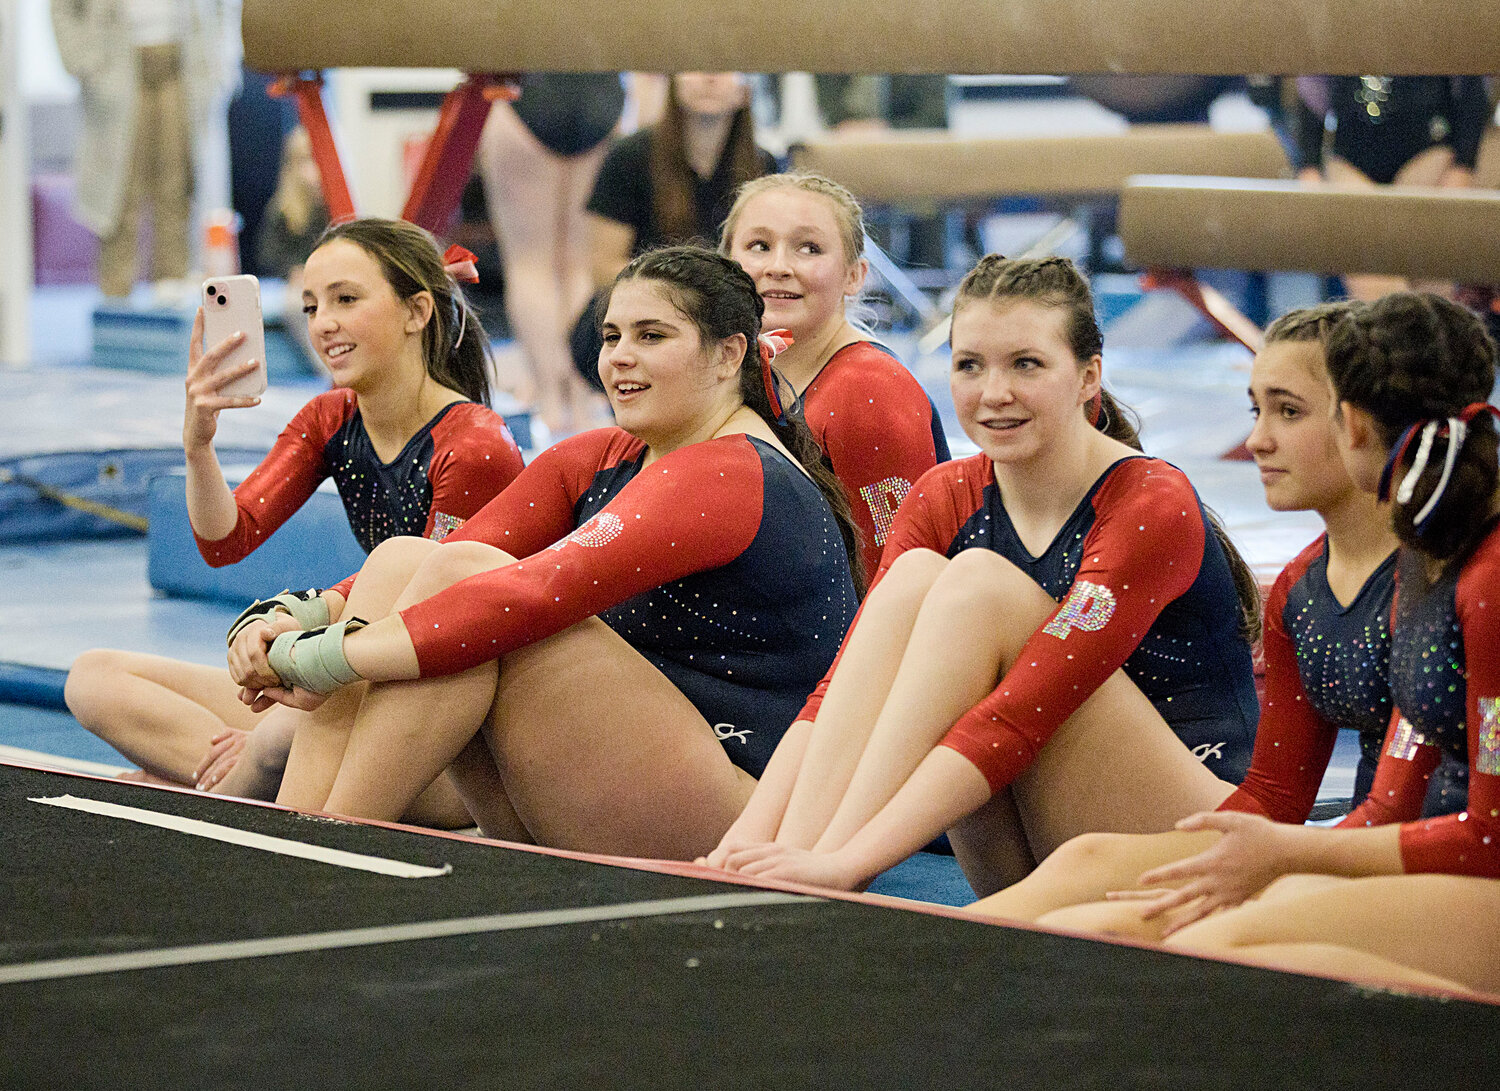 Portsmouth gymnasts look on as a teammate competes on floor.